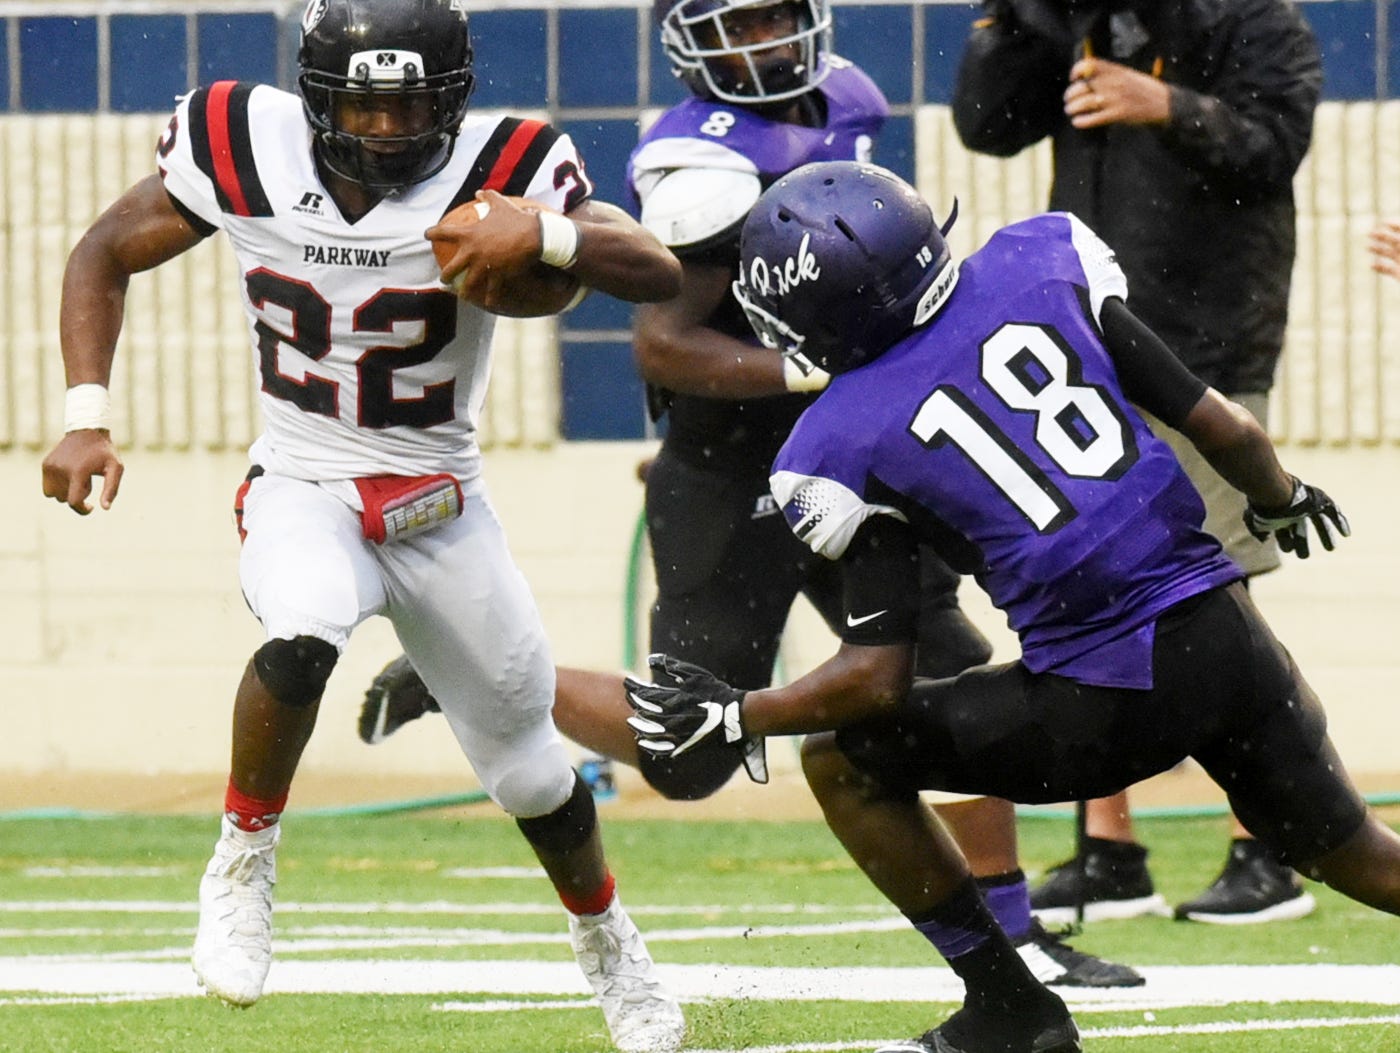 Parkway's Robert Mcknight escapes Lufkin's defense during the Battle on the Border Saturday at Independence Stadium.